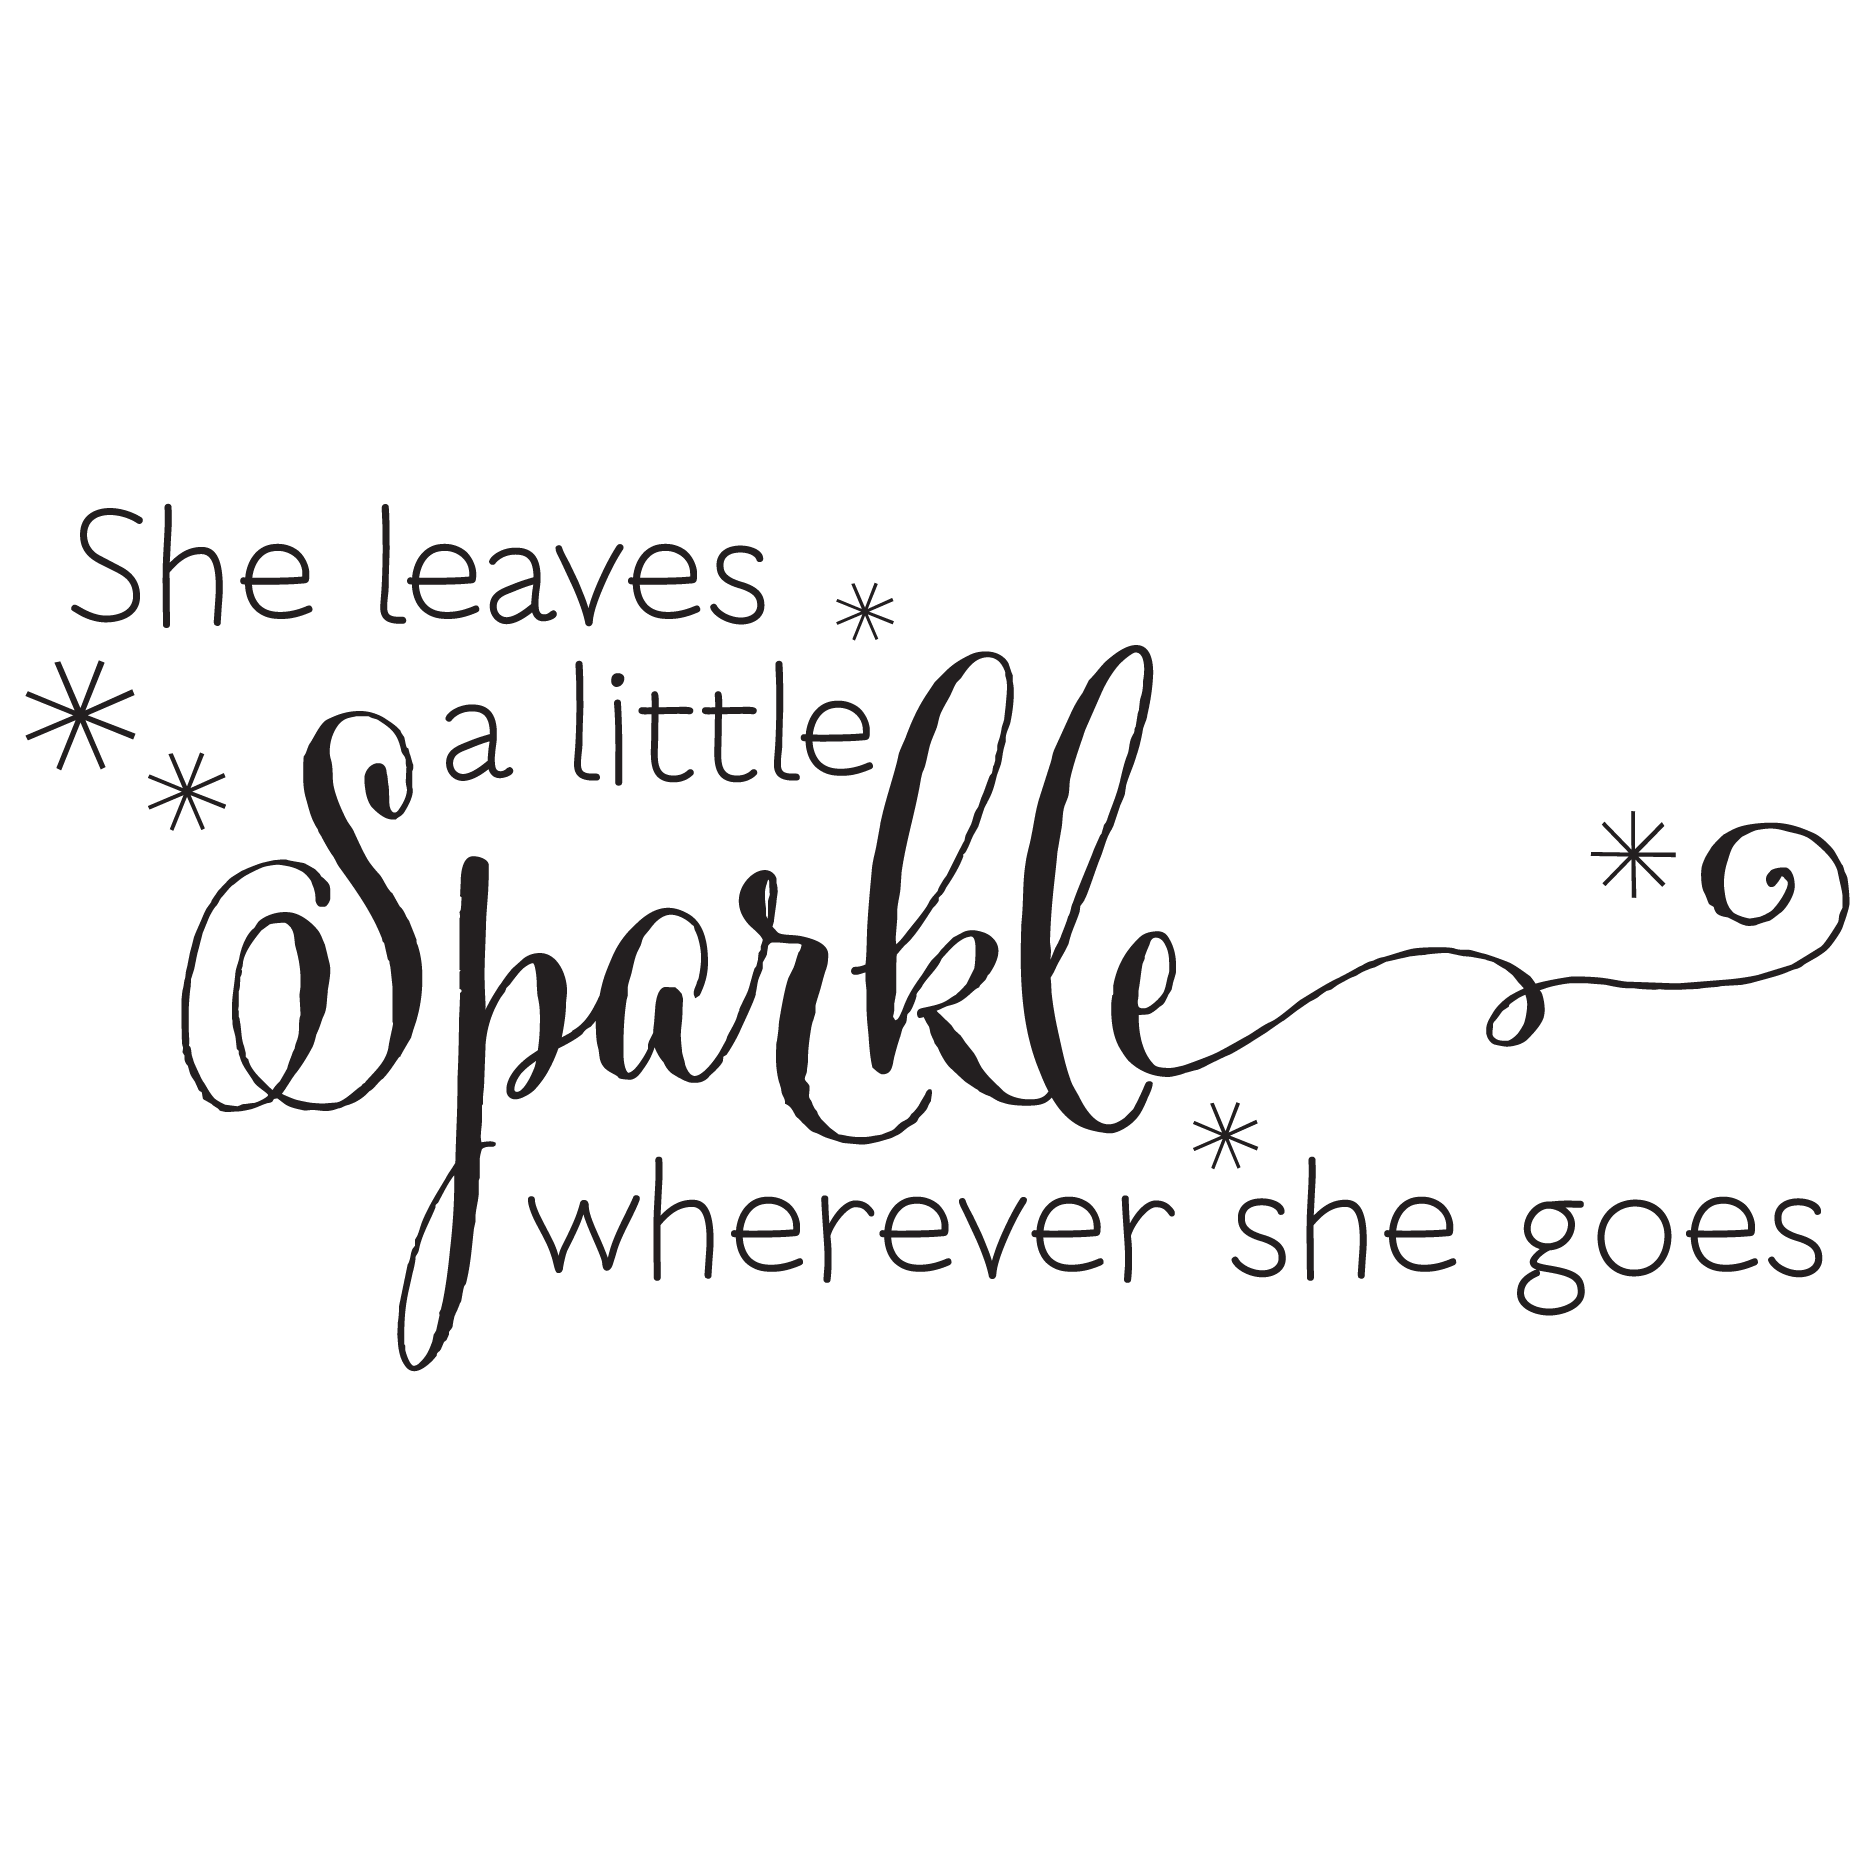 image of sparkle quotes